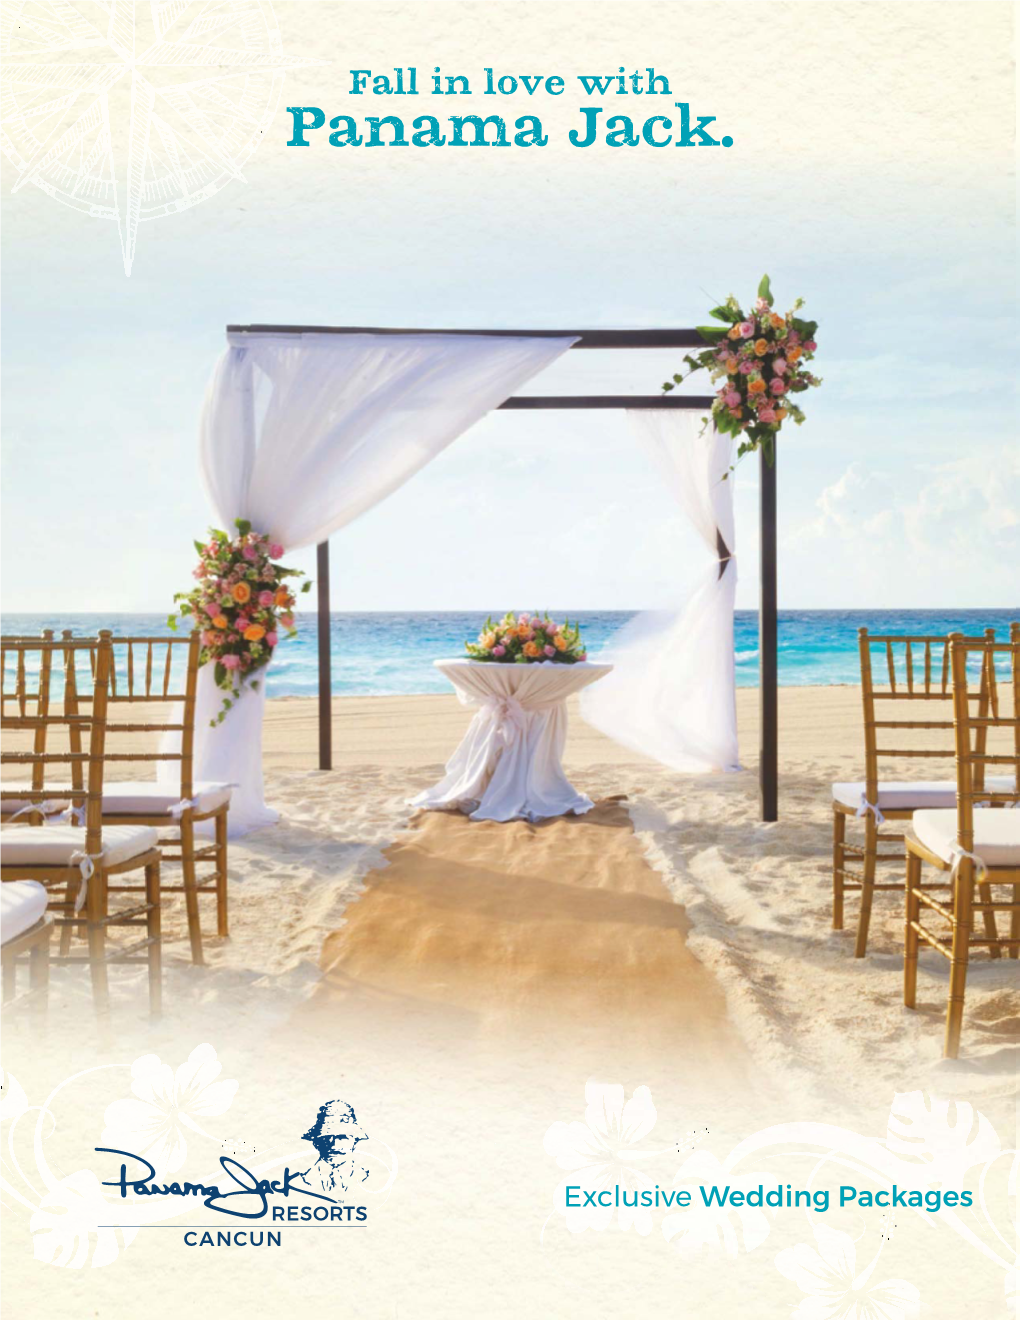 Exclusive Wedding Packages “For Jus  Tw  Yo” Free! When Booking a 7-Night Minimum Stay in the Junior Suite Oceanfront Or Higher Categories